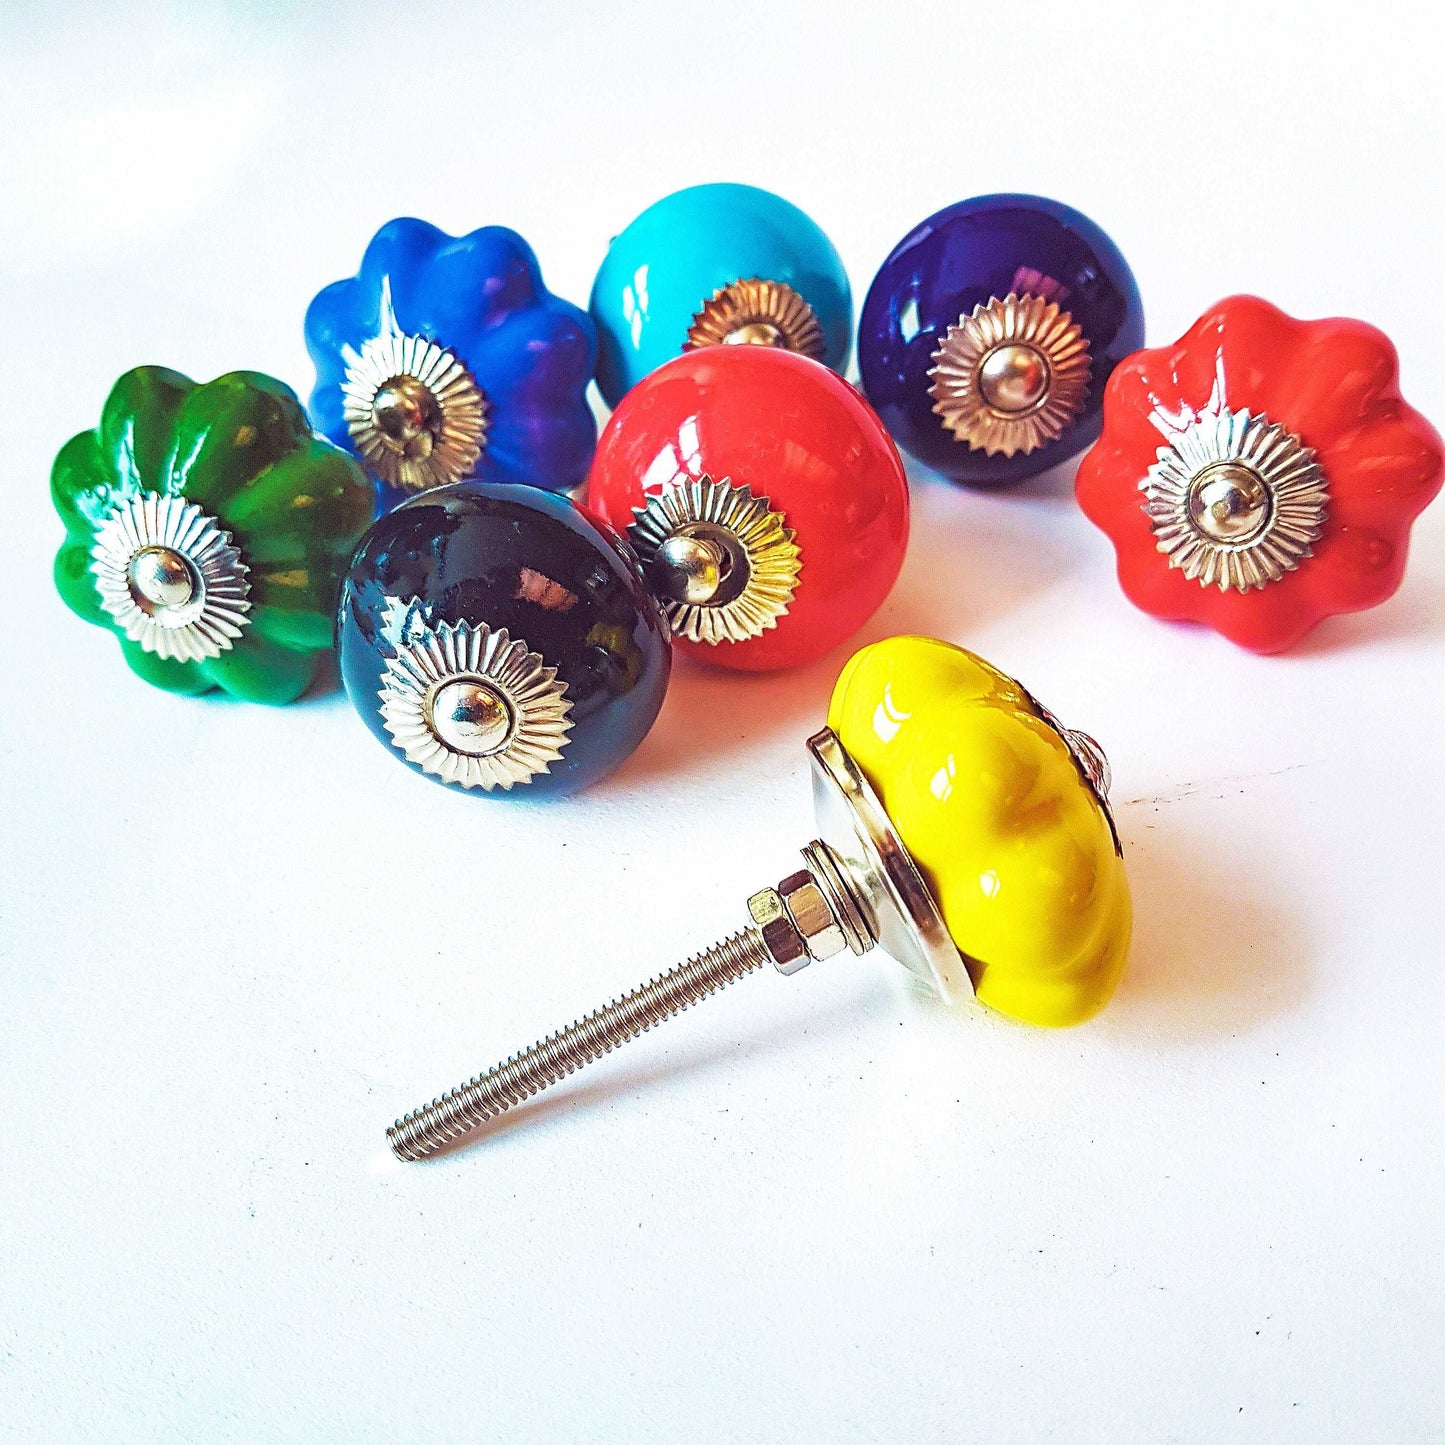 8 cabinet knobs-drawer pulls for cupboards & dressers. Ceramic 8 piece hardware set of vibrant solid colors. 1.5 inch diameter. - Vintage India Ca